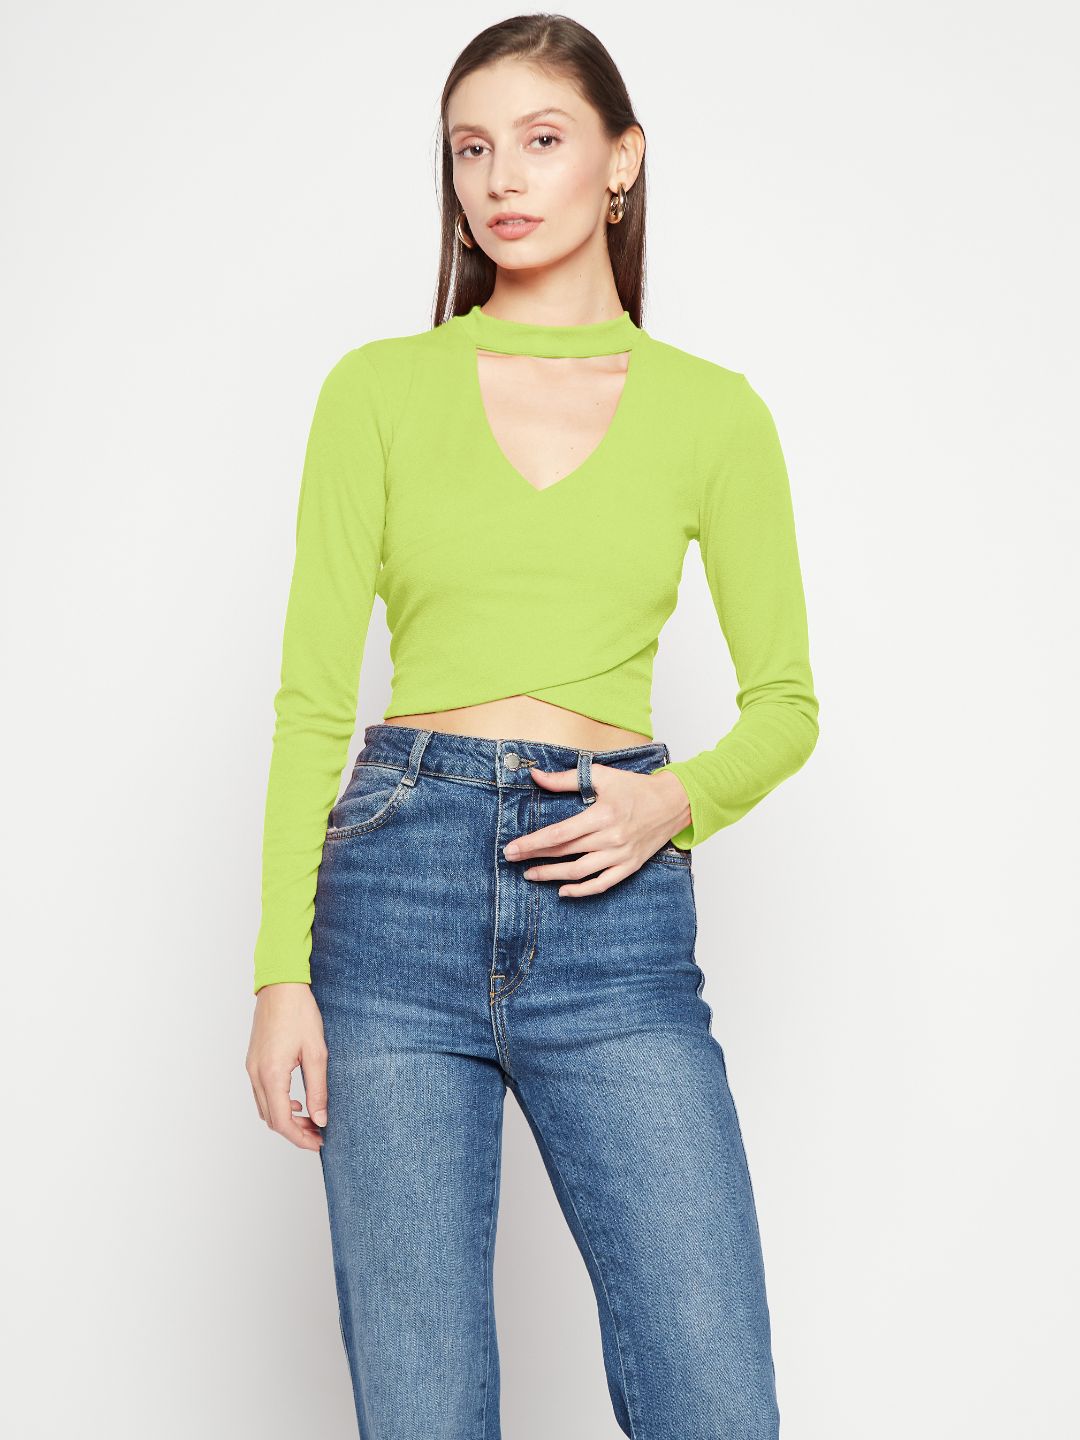 Stretchable Cotton Top With Criss Cross Detailing - Uptownie